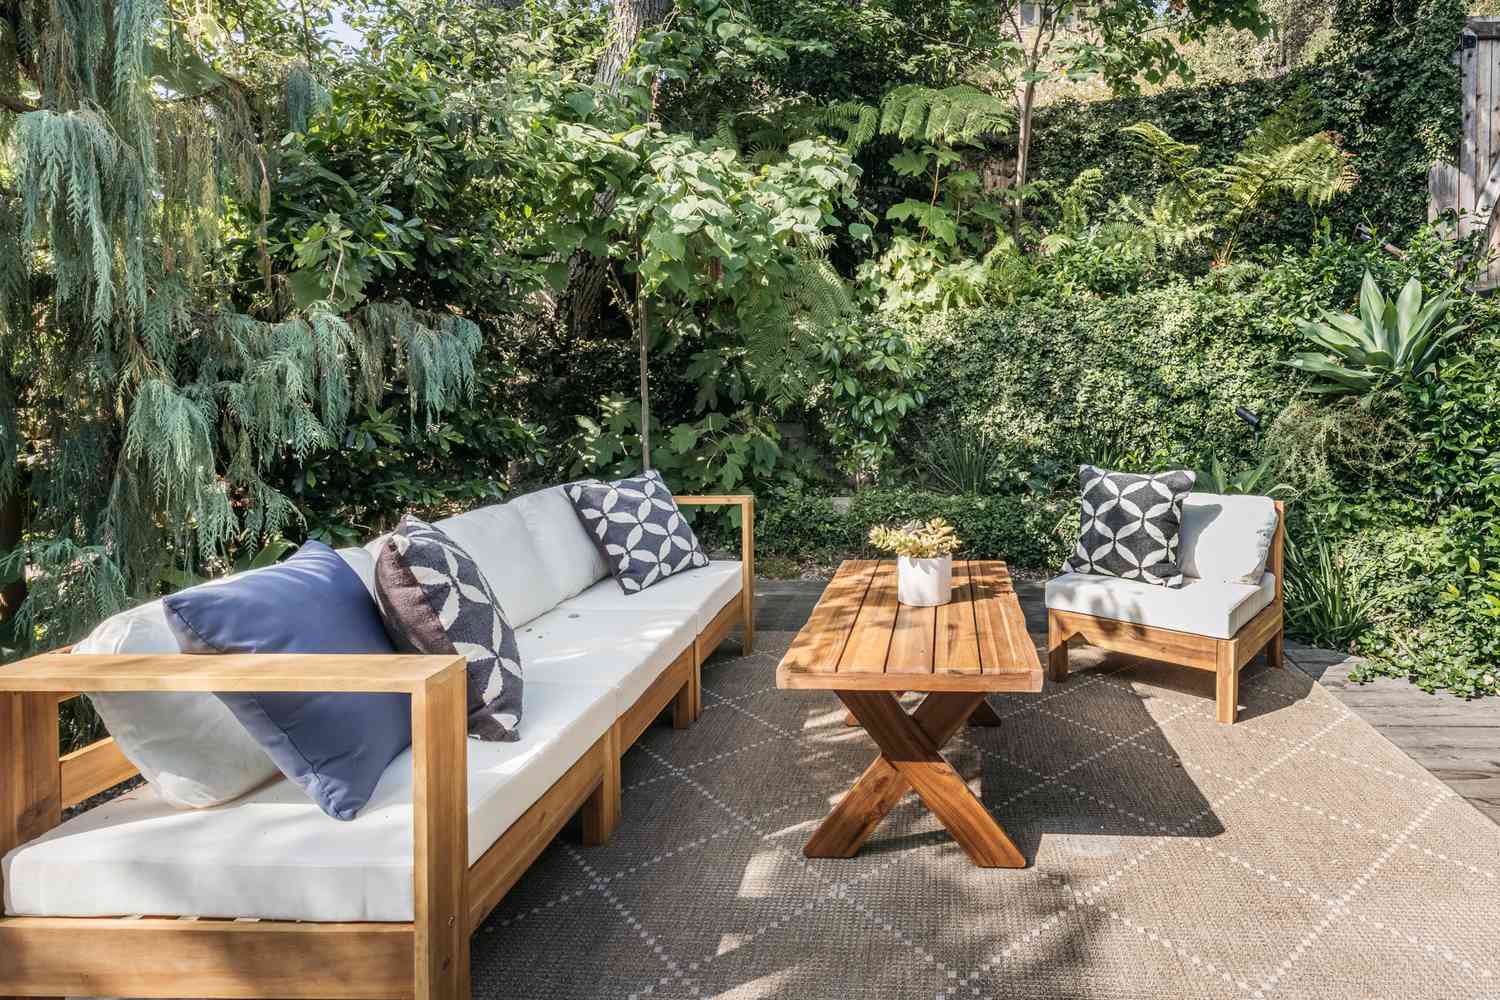 What are one of the highlights of a garden lounge?